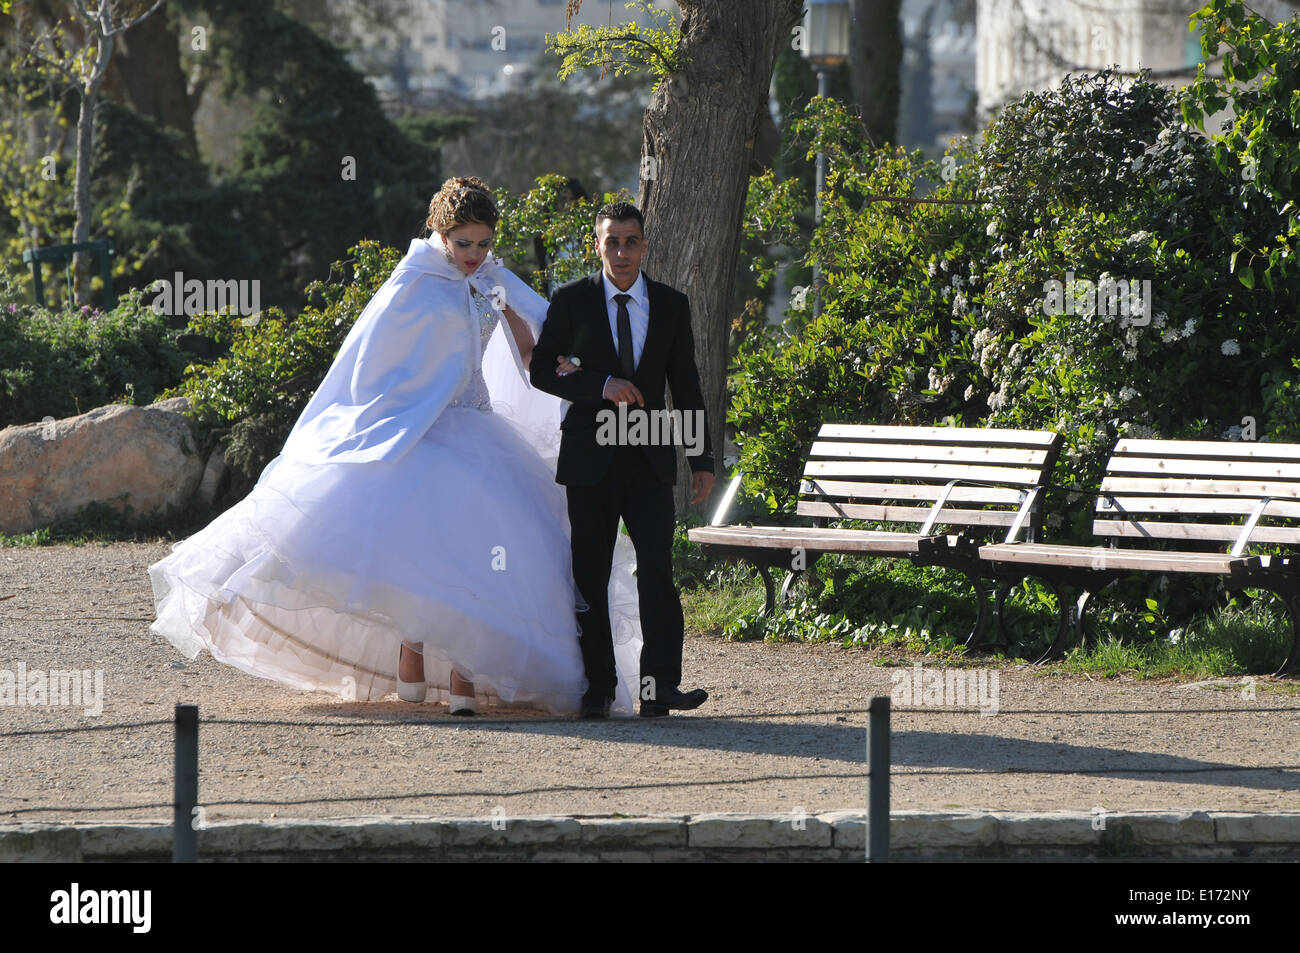 Arab Bride and groom having their wedding pictures taken at the Wohl Rose Park of Jerusalem Stock Photo